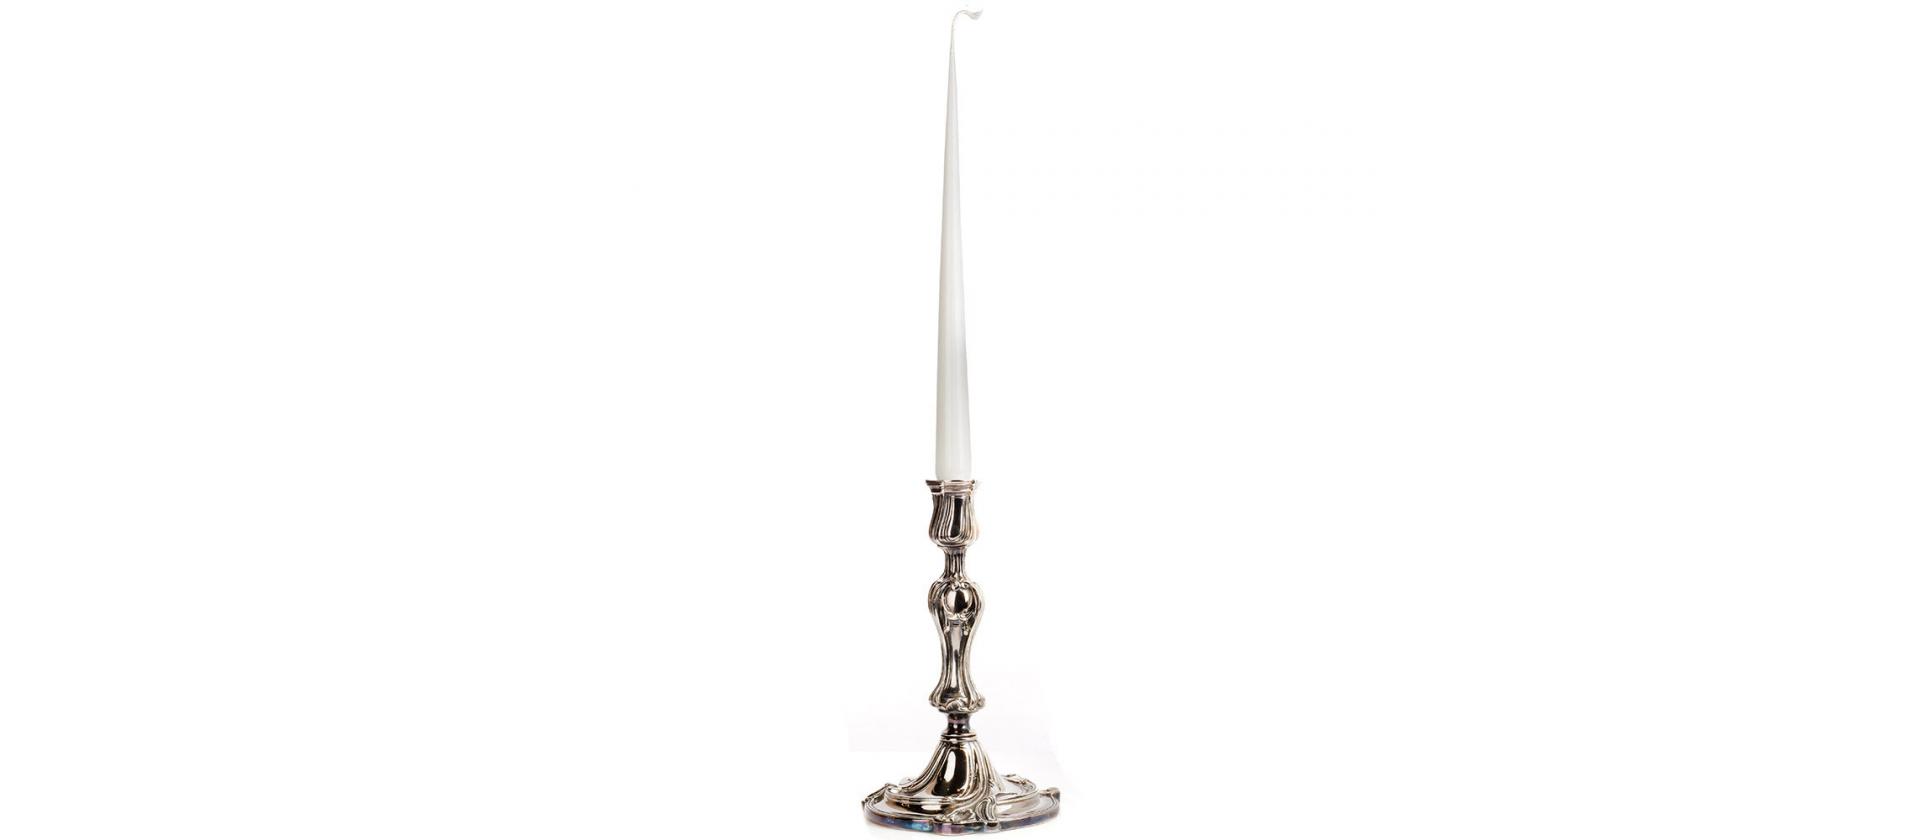 Silver Plated Candlestick Christofle Trianon big